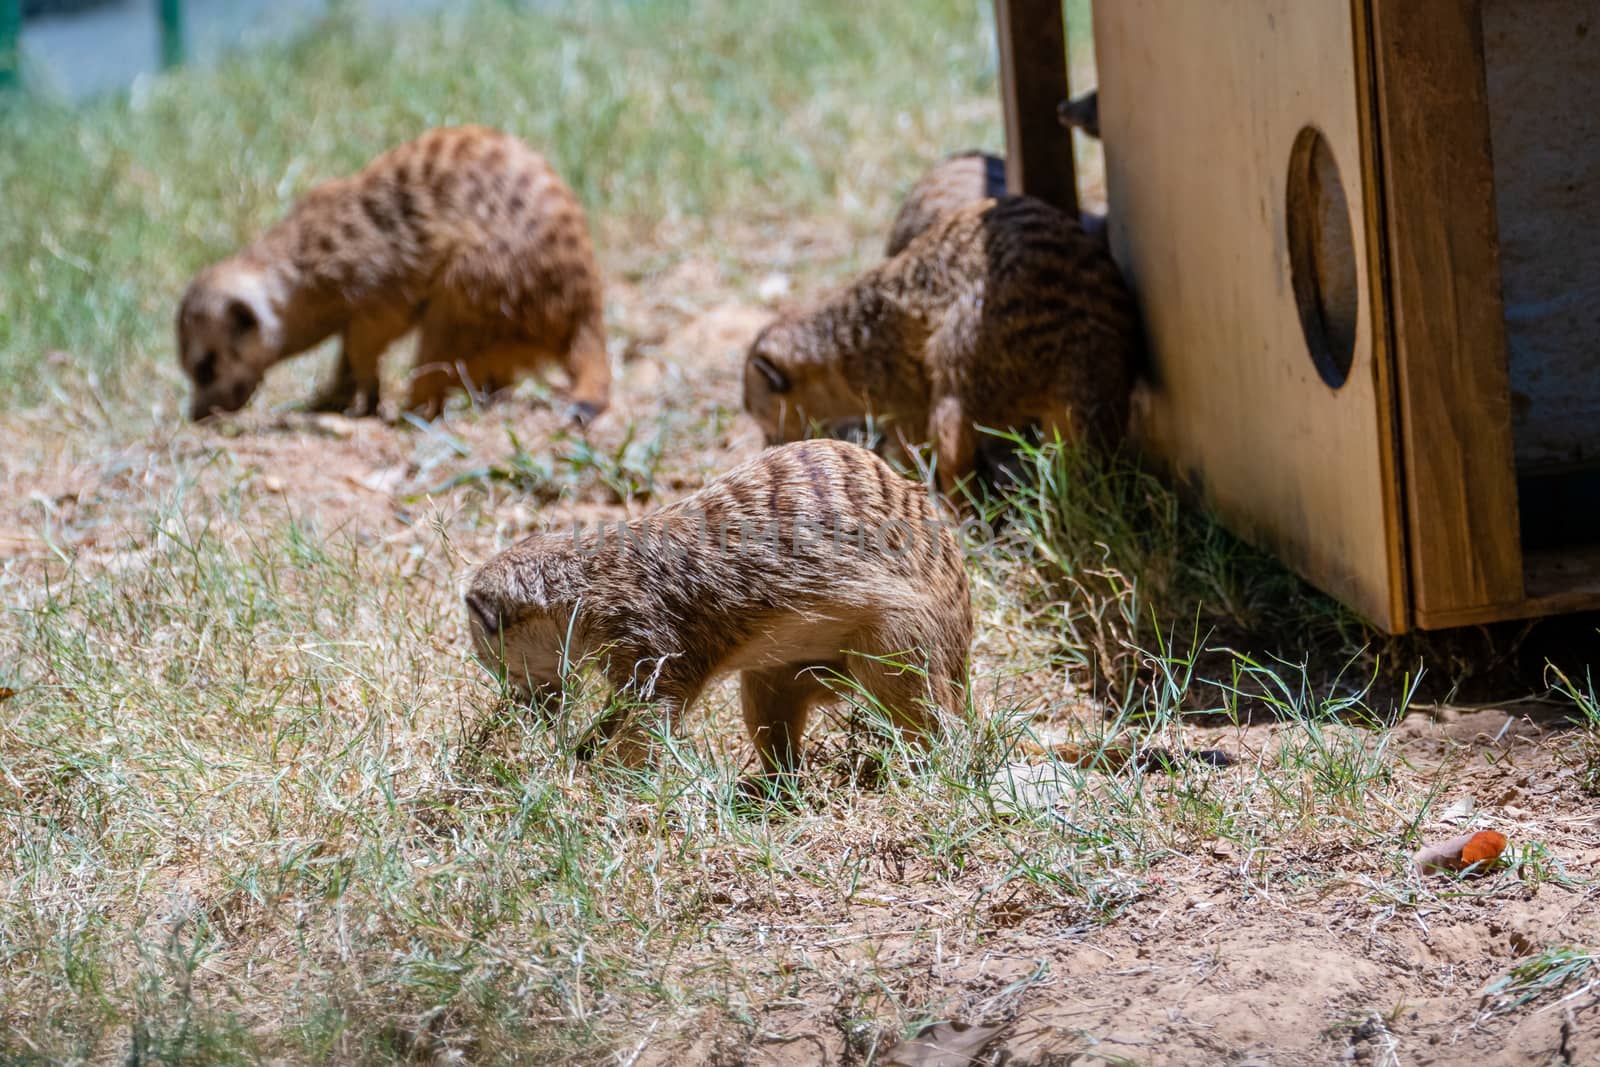 Family of meerkats around home by imagesbykenny